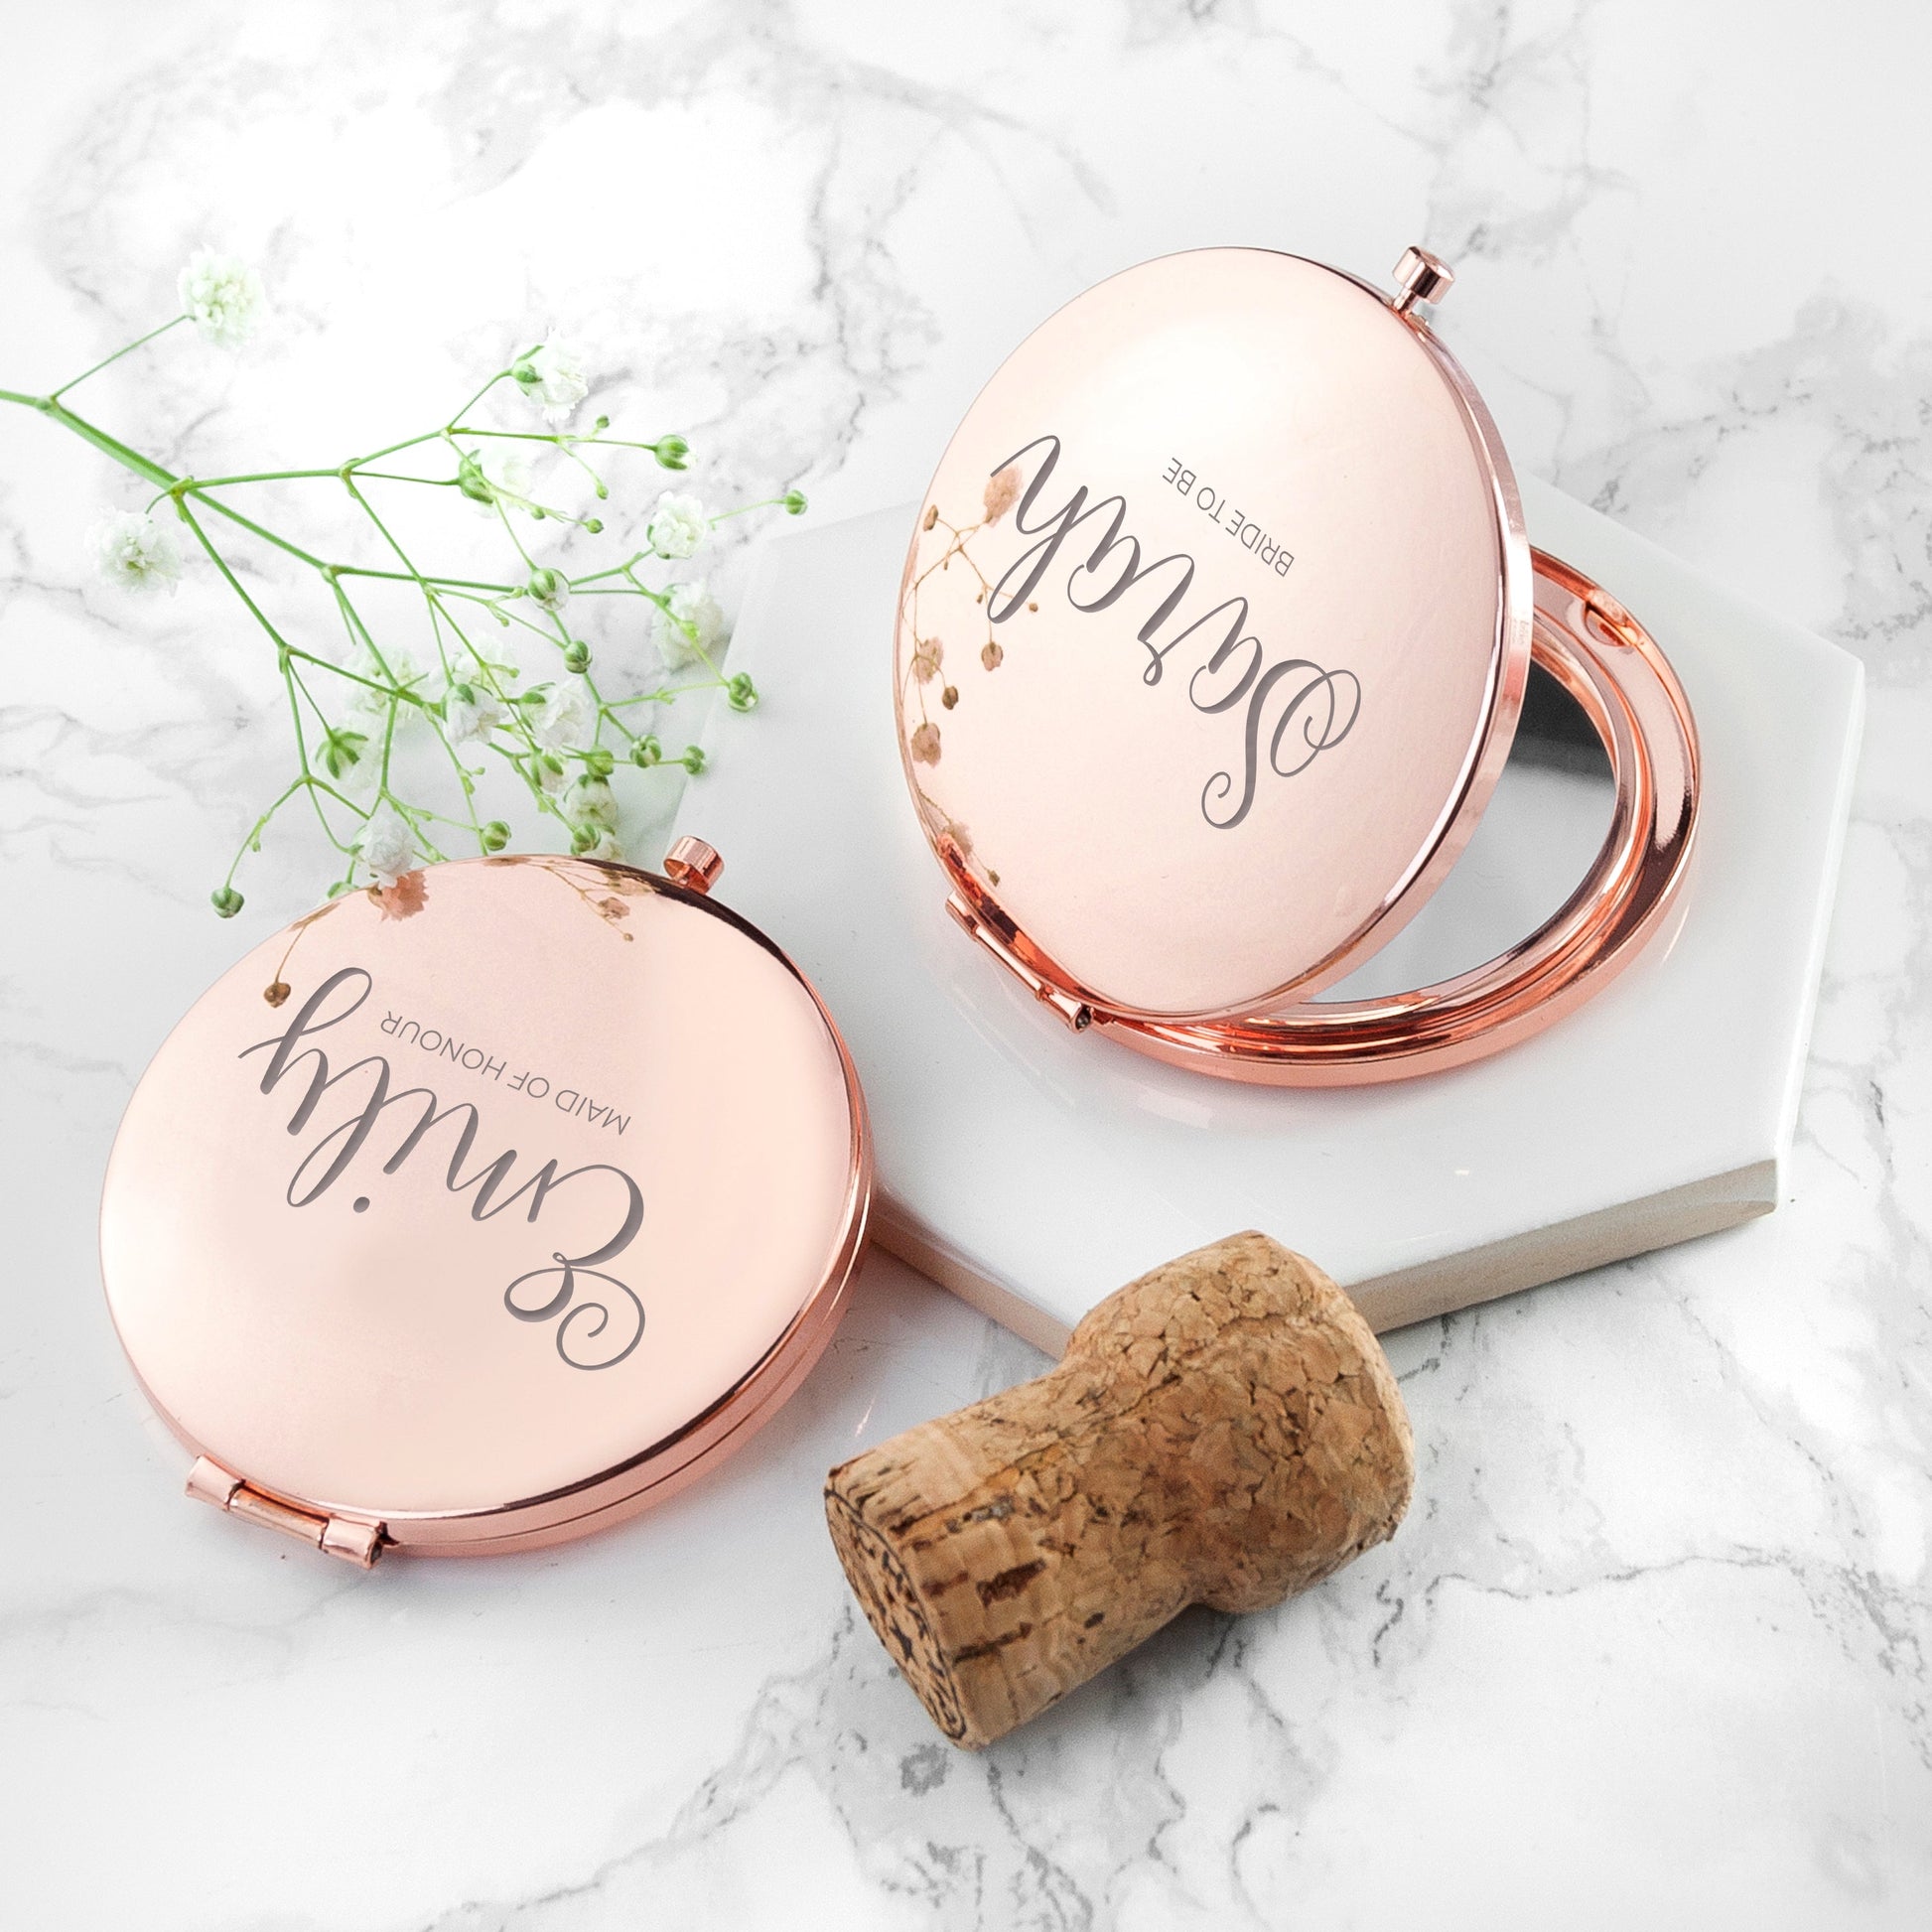 Personalized Compact Mirrors - Personalized Round Rose Gold Compact Mirror 